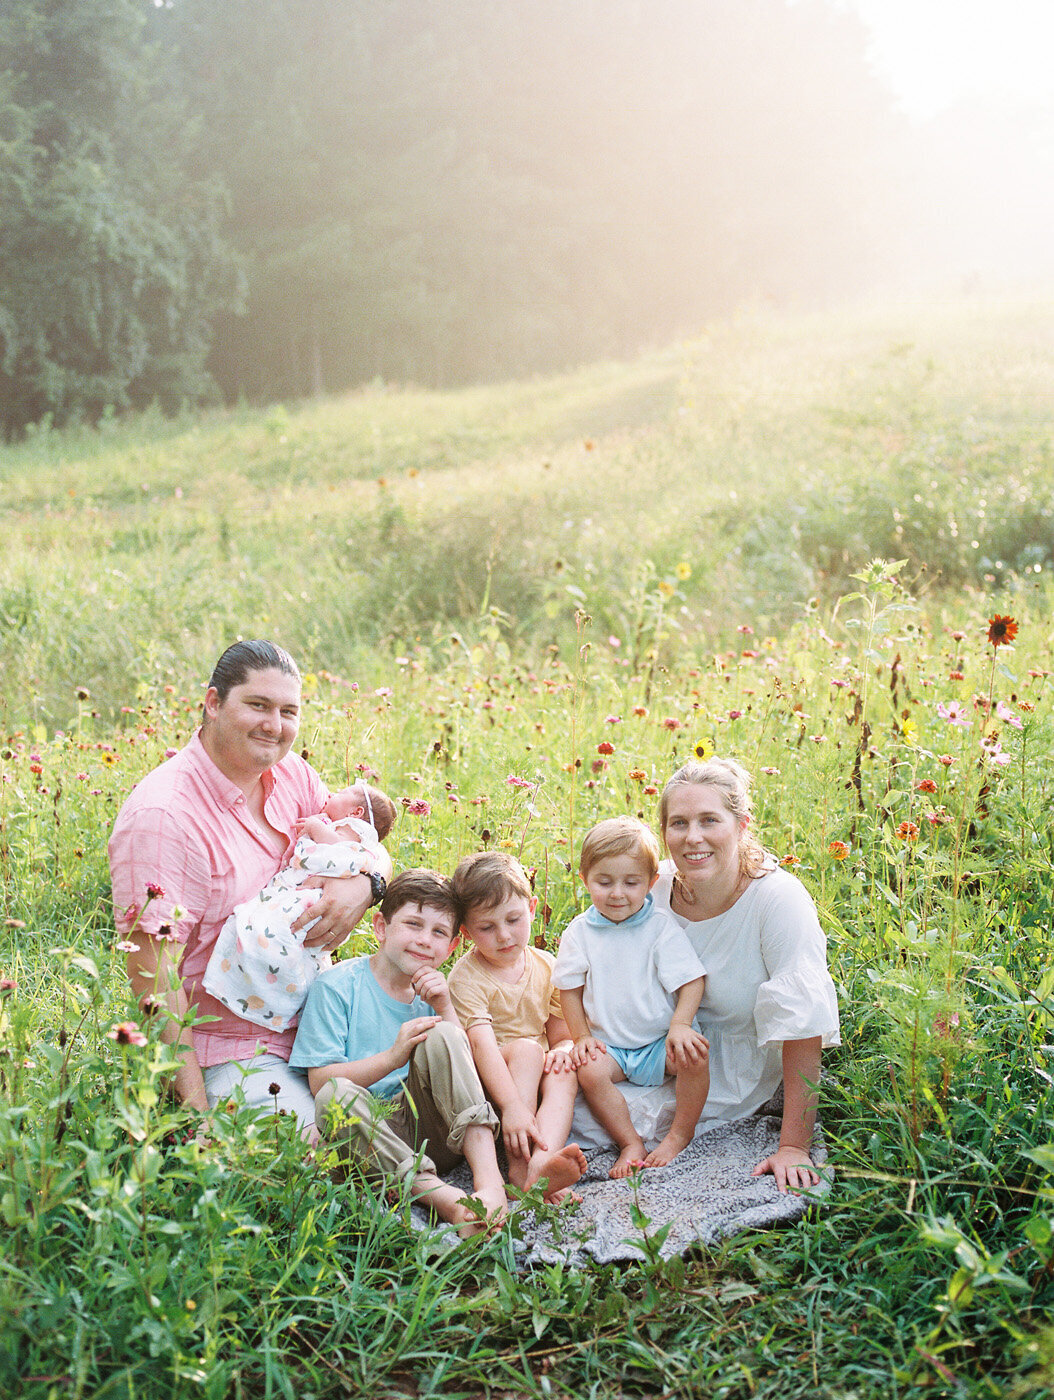 Raleigh Family Photographer | Jessica Agee Photography - 008